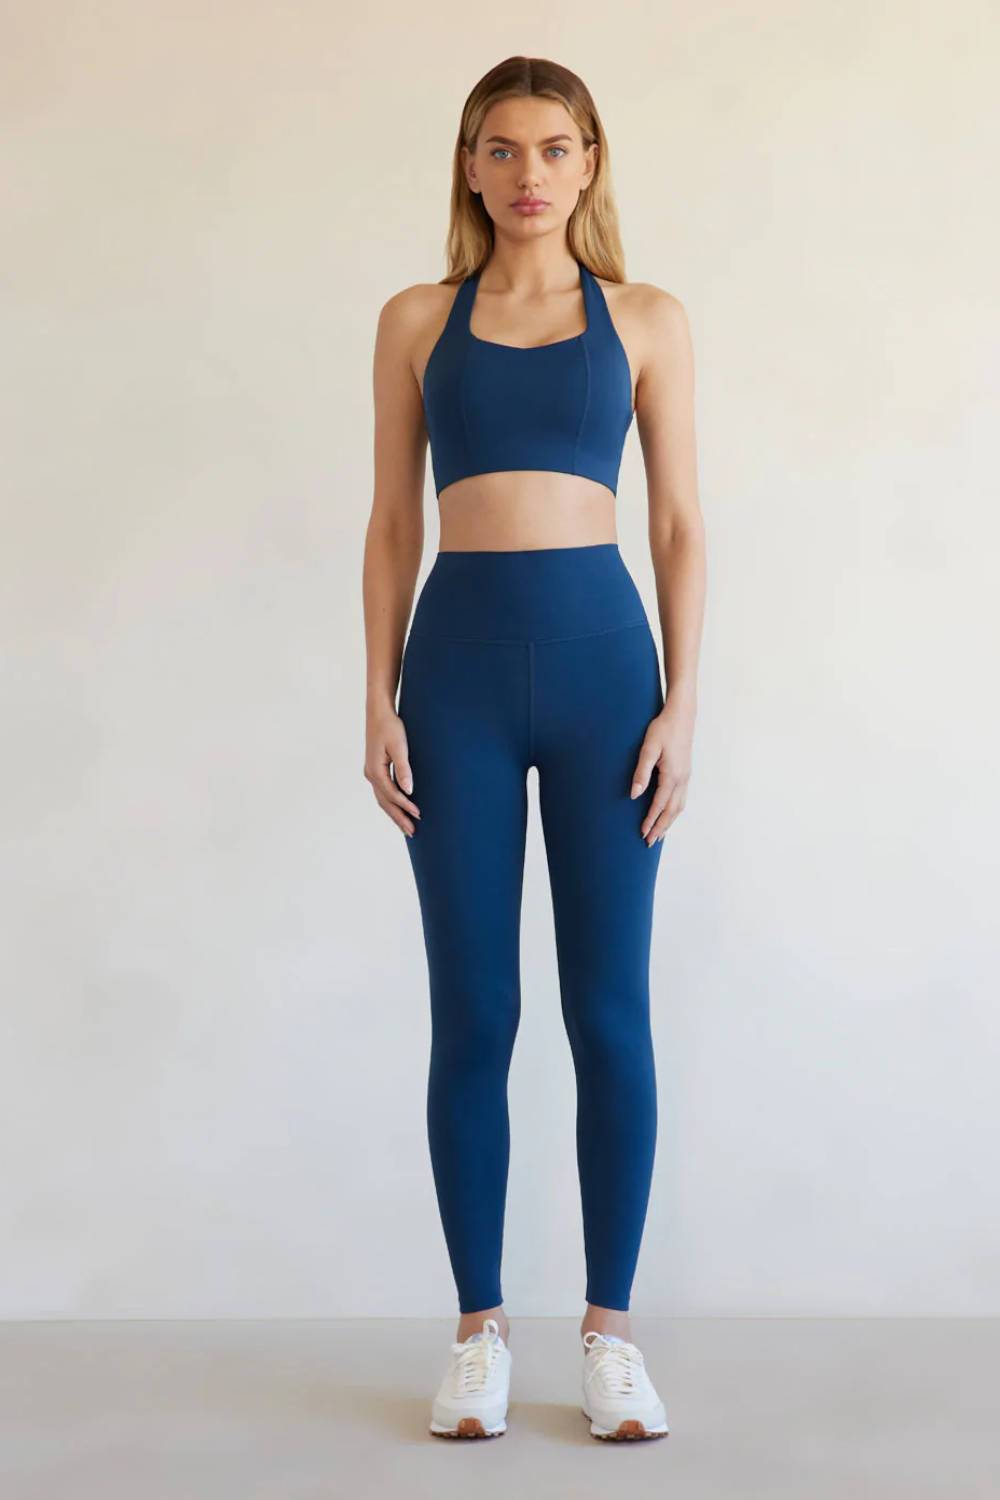 carbon38 recycled activewear brand